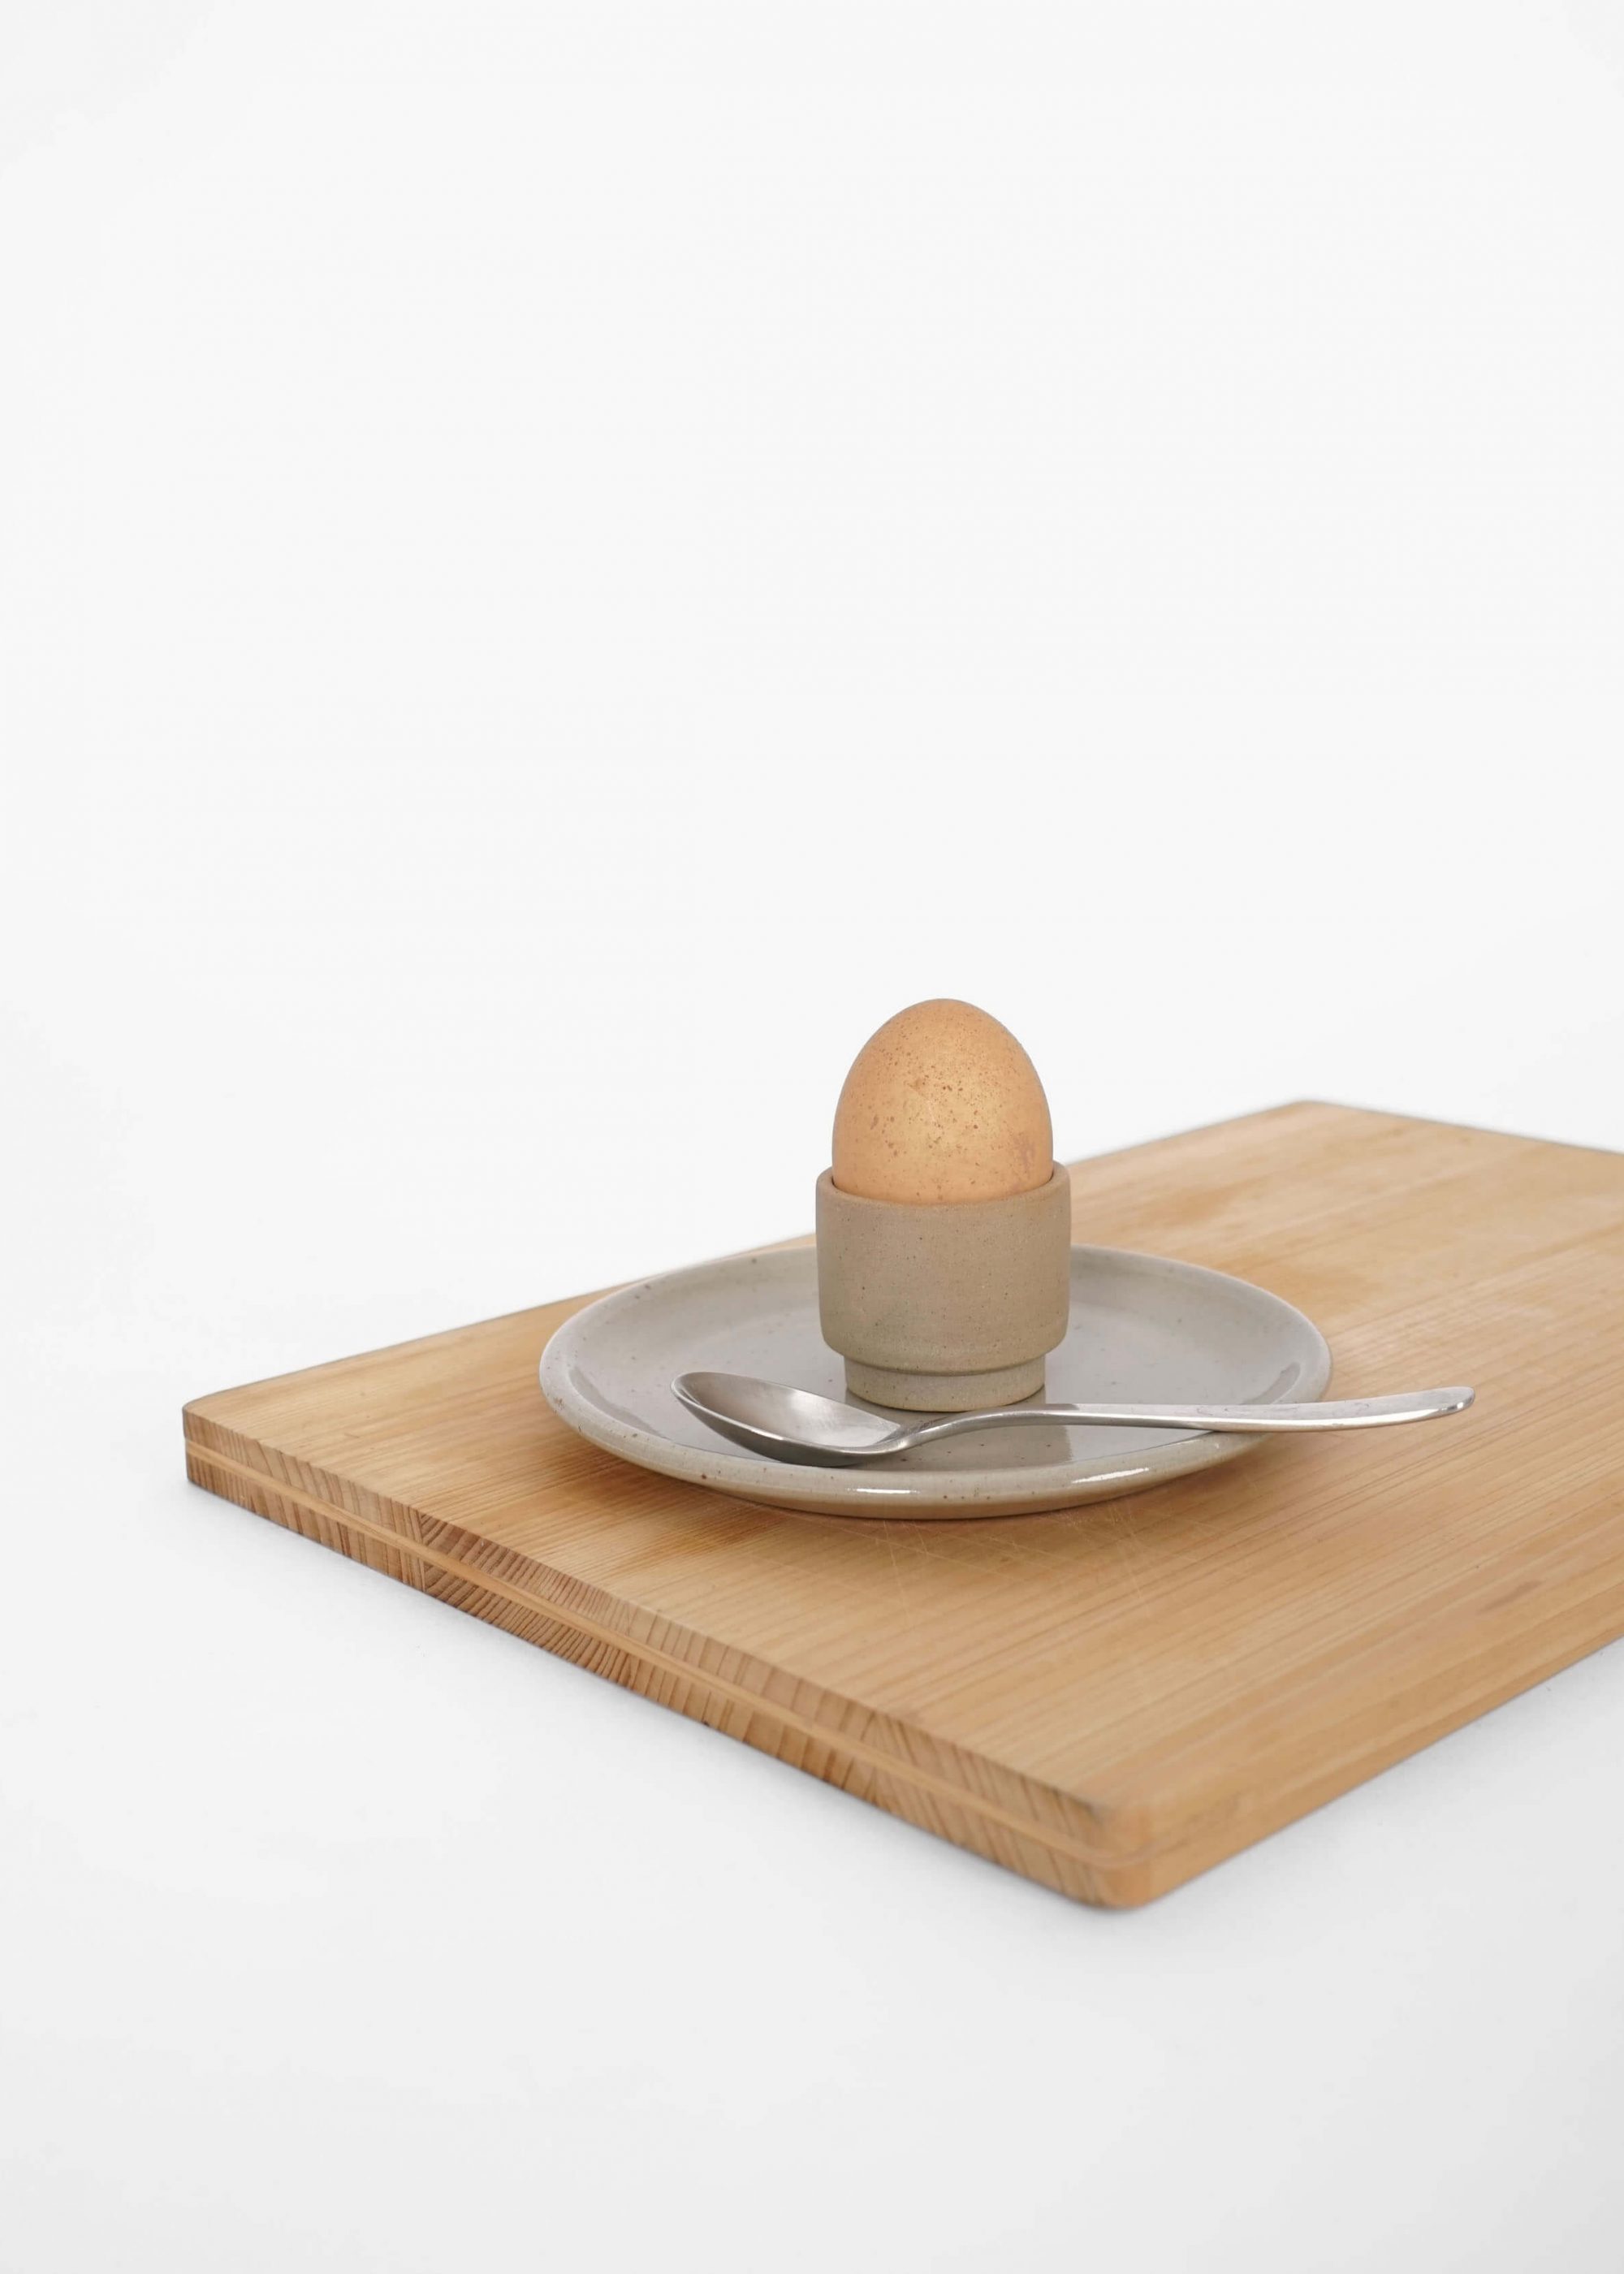 Product image for N° ICSF2 Beuys Egg Cup